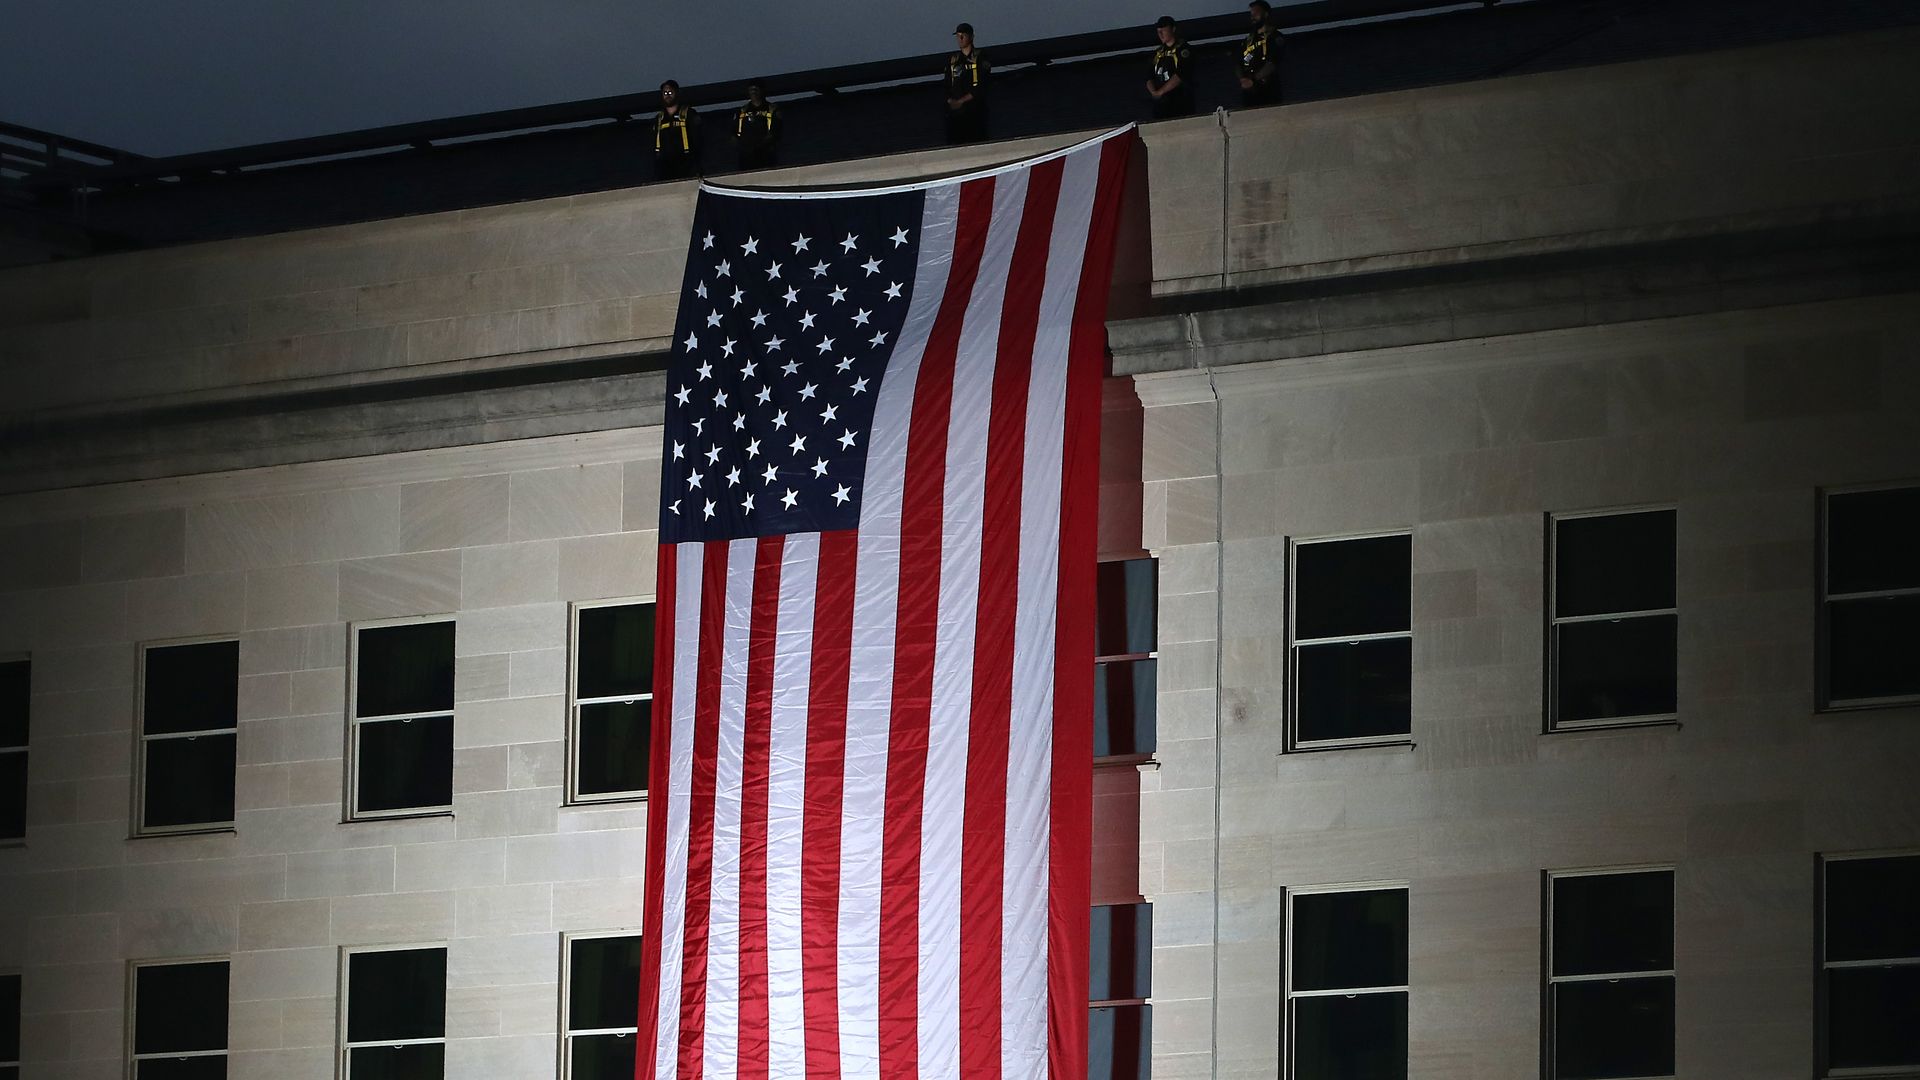  An American flag is unfurled on the side of the Pentagon to commemorate the anniversary of the 9/11 terror attacks September 11, 2019 in Arlington, Virginia